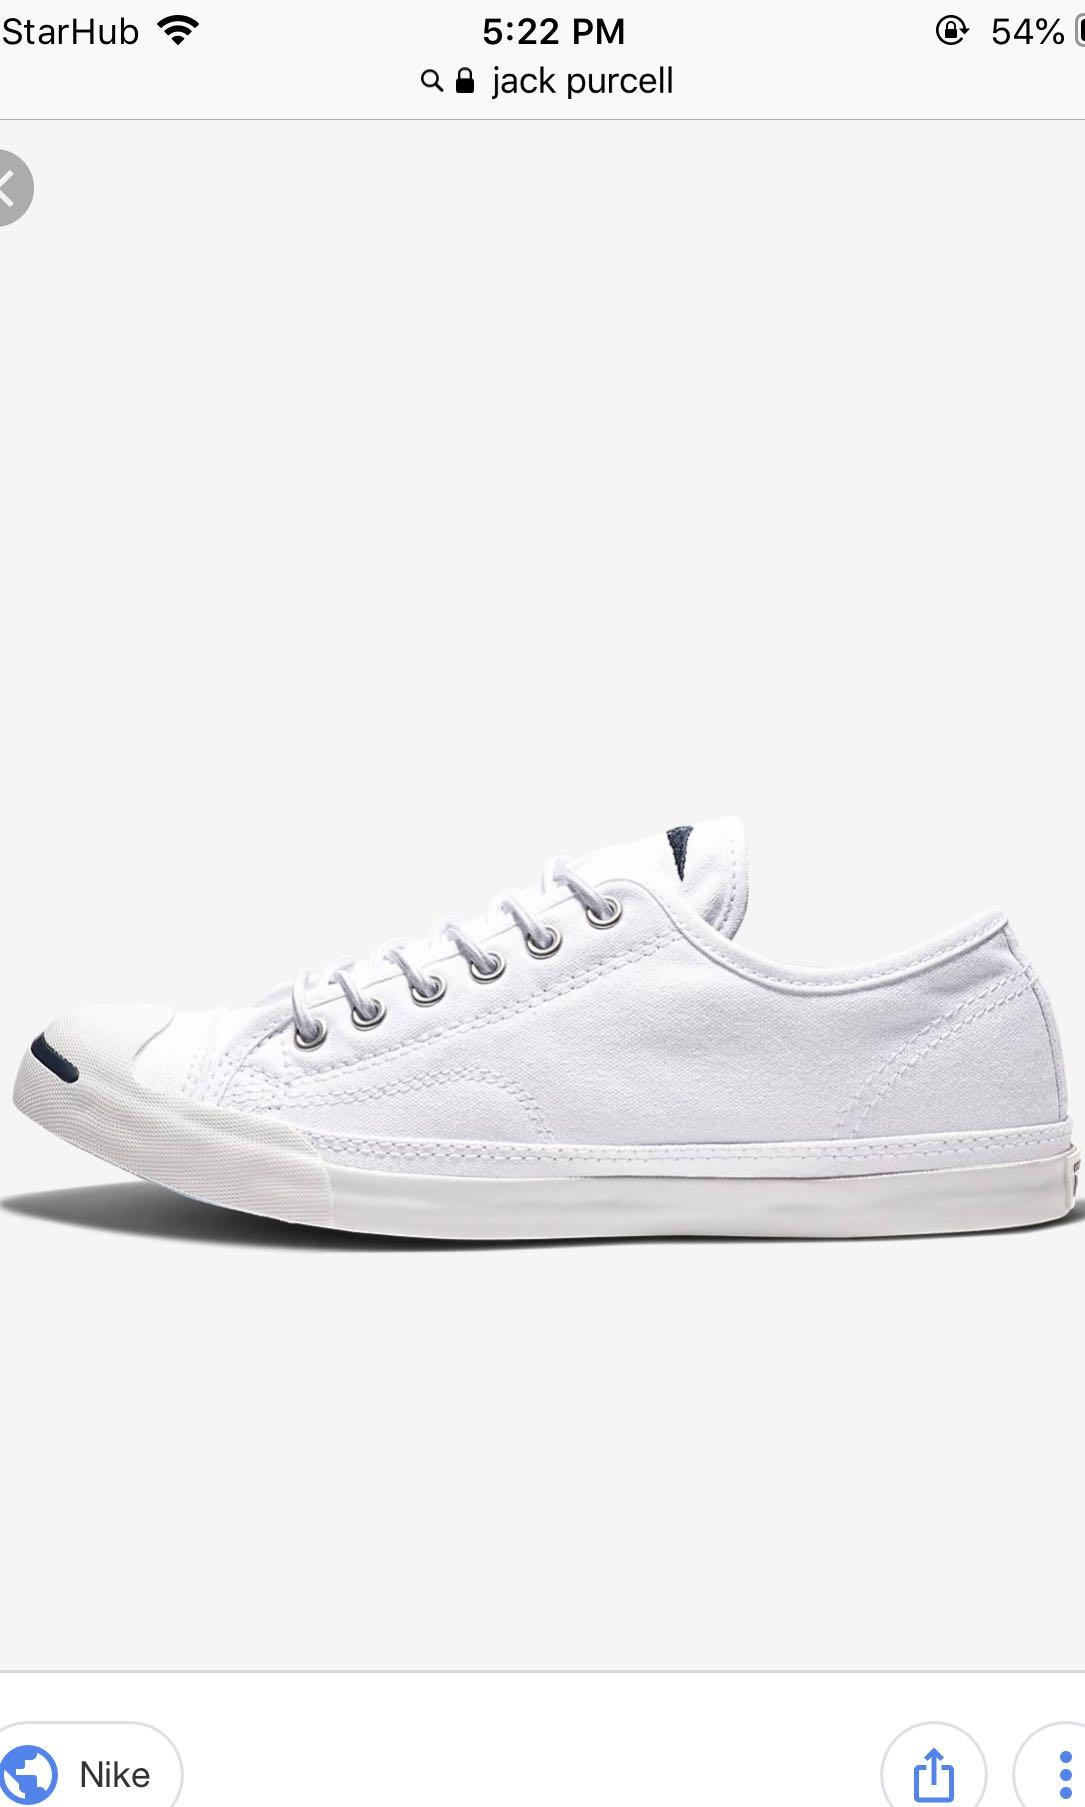 converse jack purcell uk